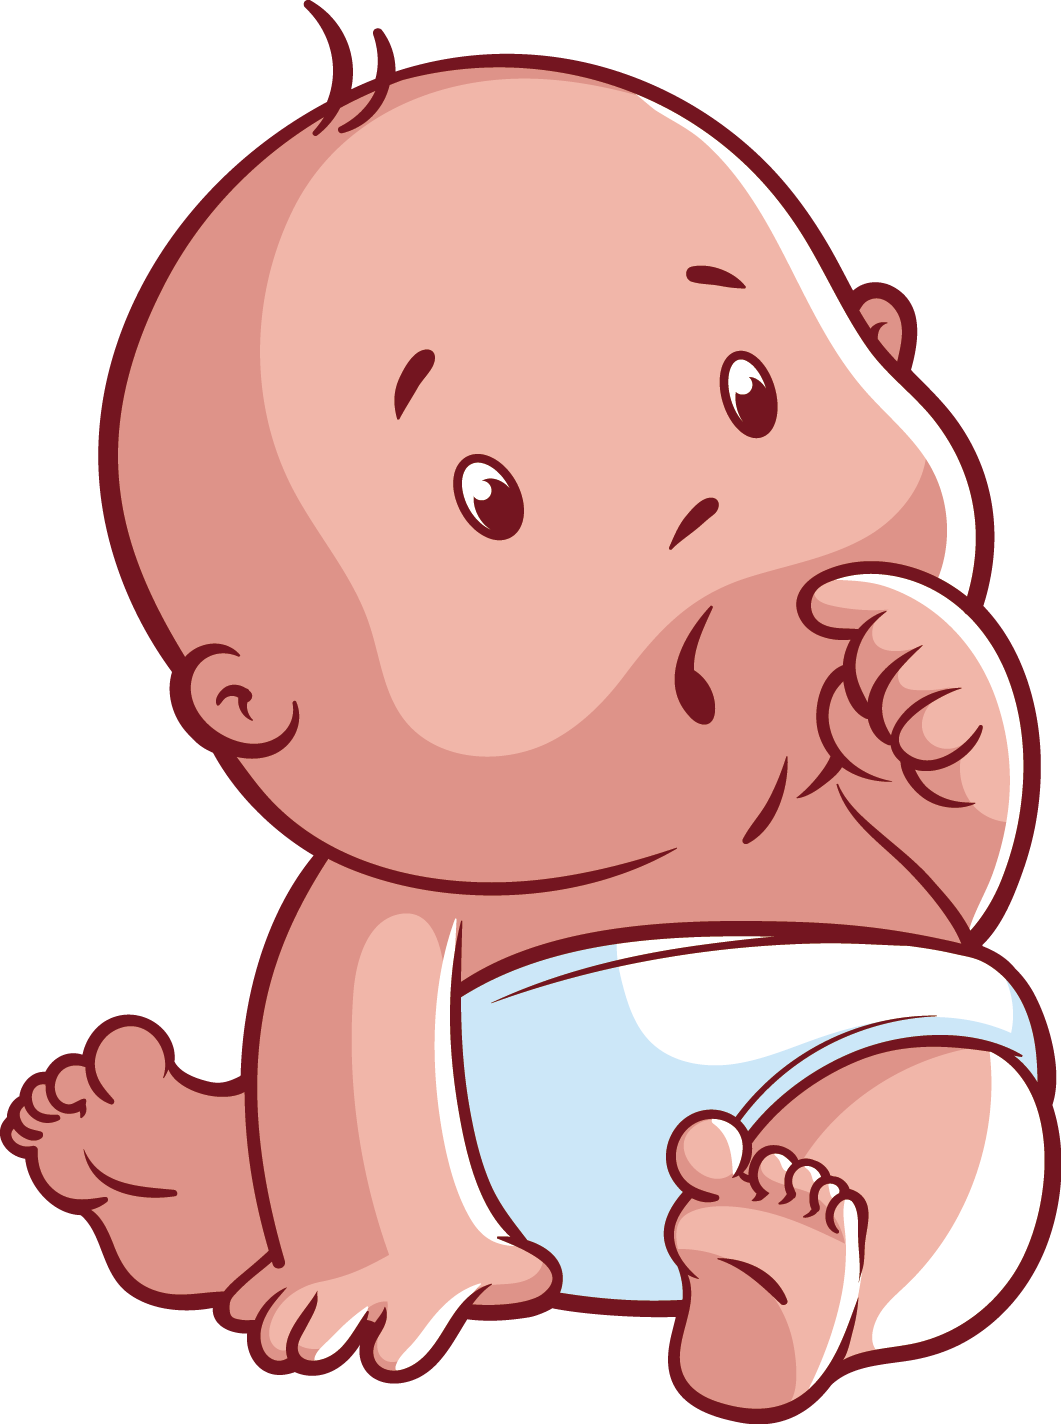 Infant clipart baby indian. Cartoon drawing clip art